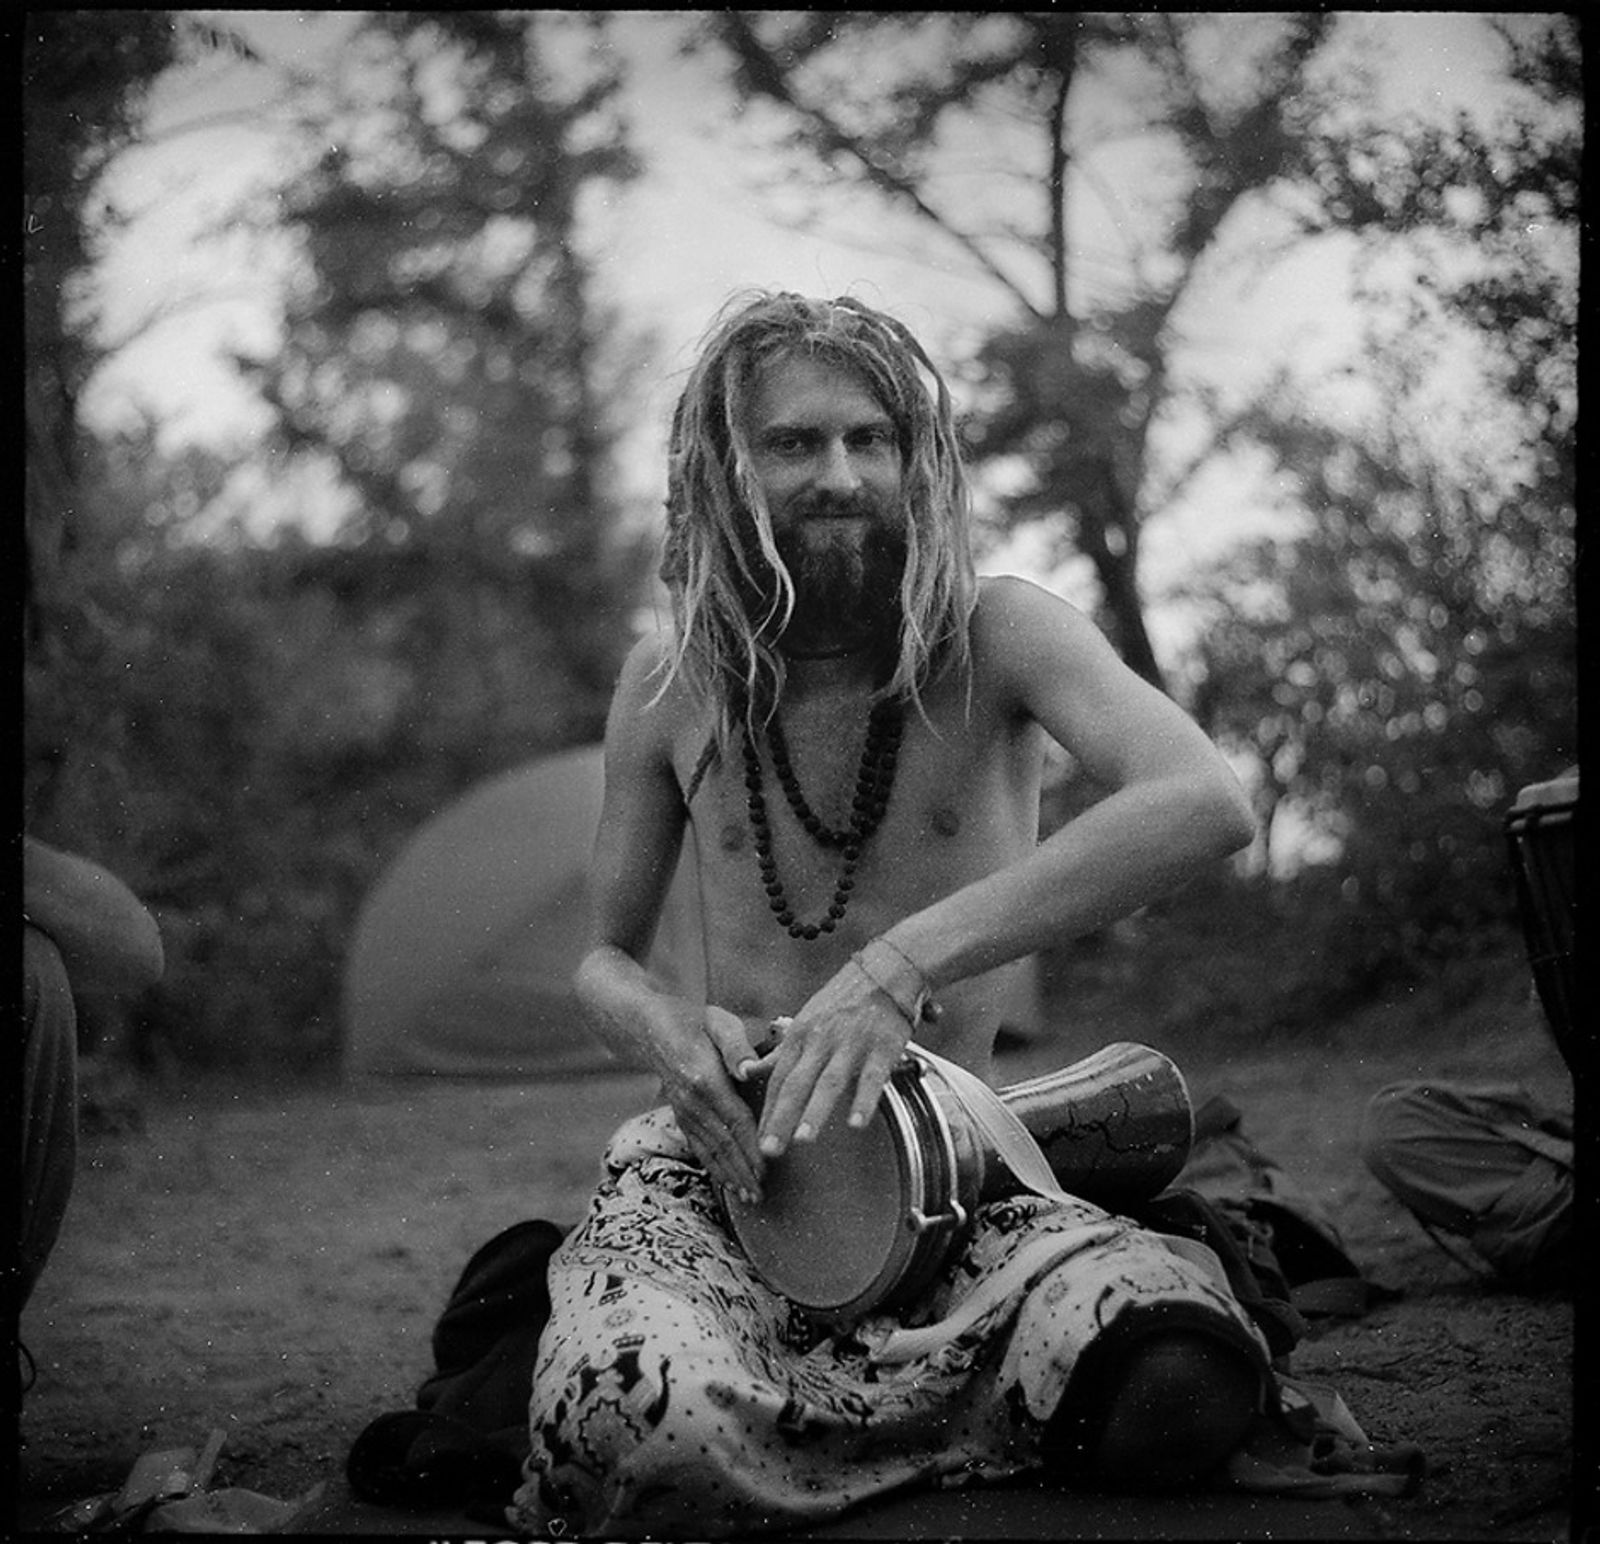 © Max Shevchenko - Image from the Rainbow Gathering Ukraine 2013 photography project